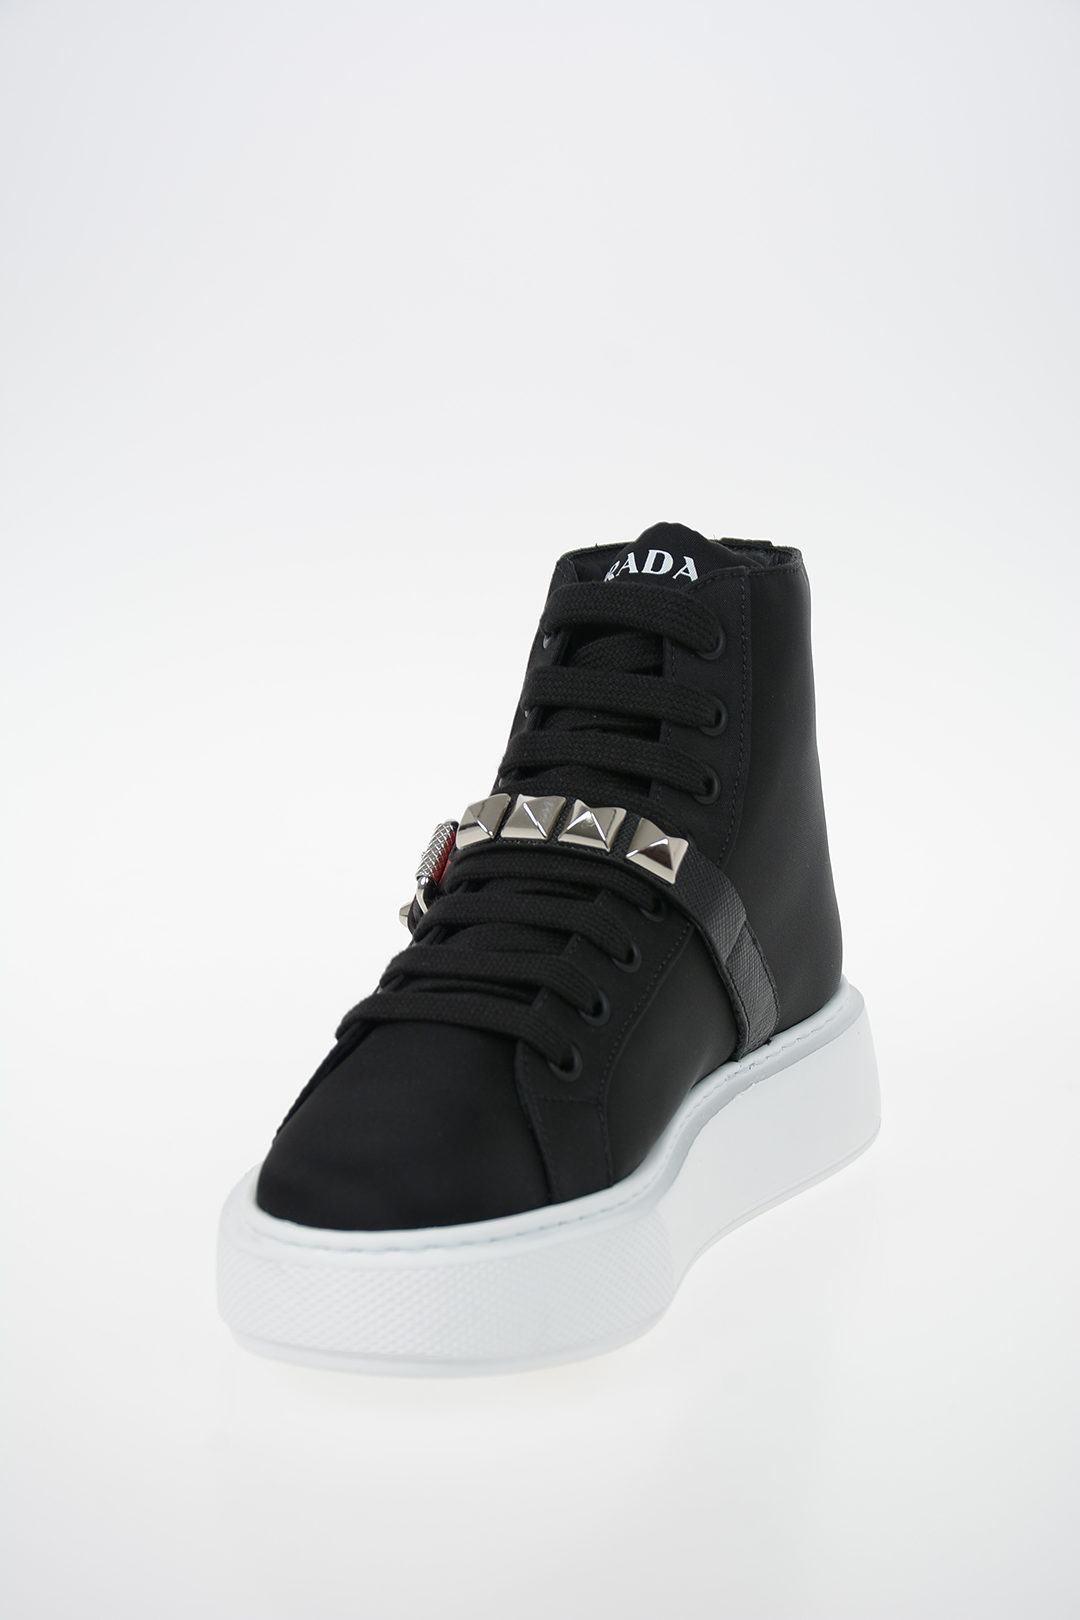 Prada Platform Sneakers with Studs women - Glamood Outlet